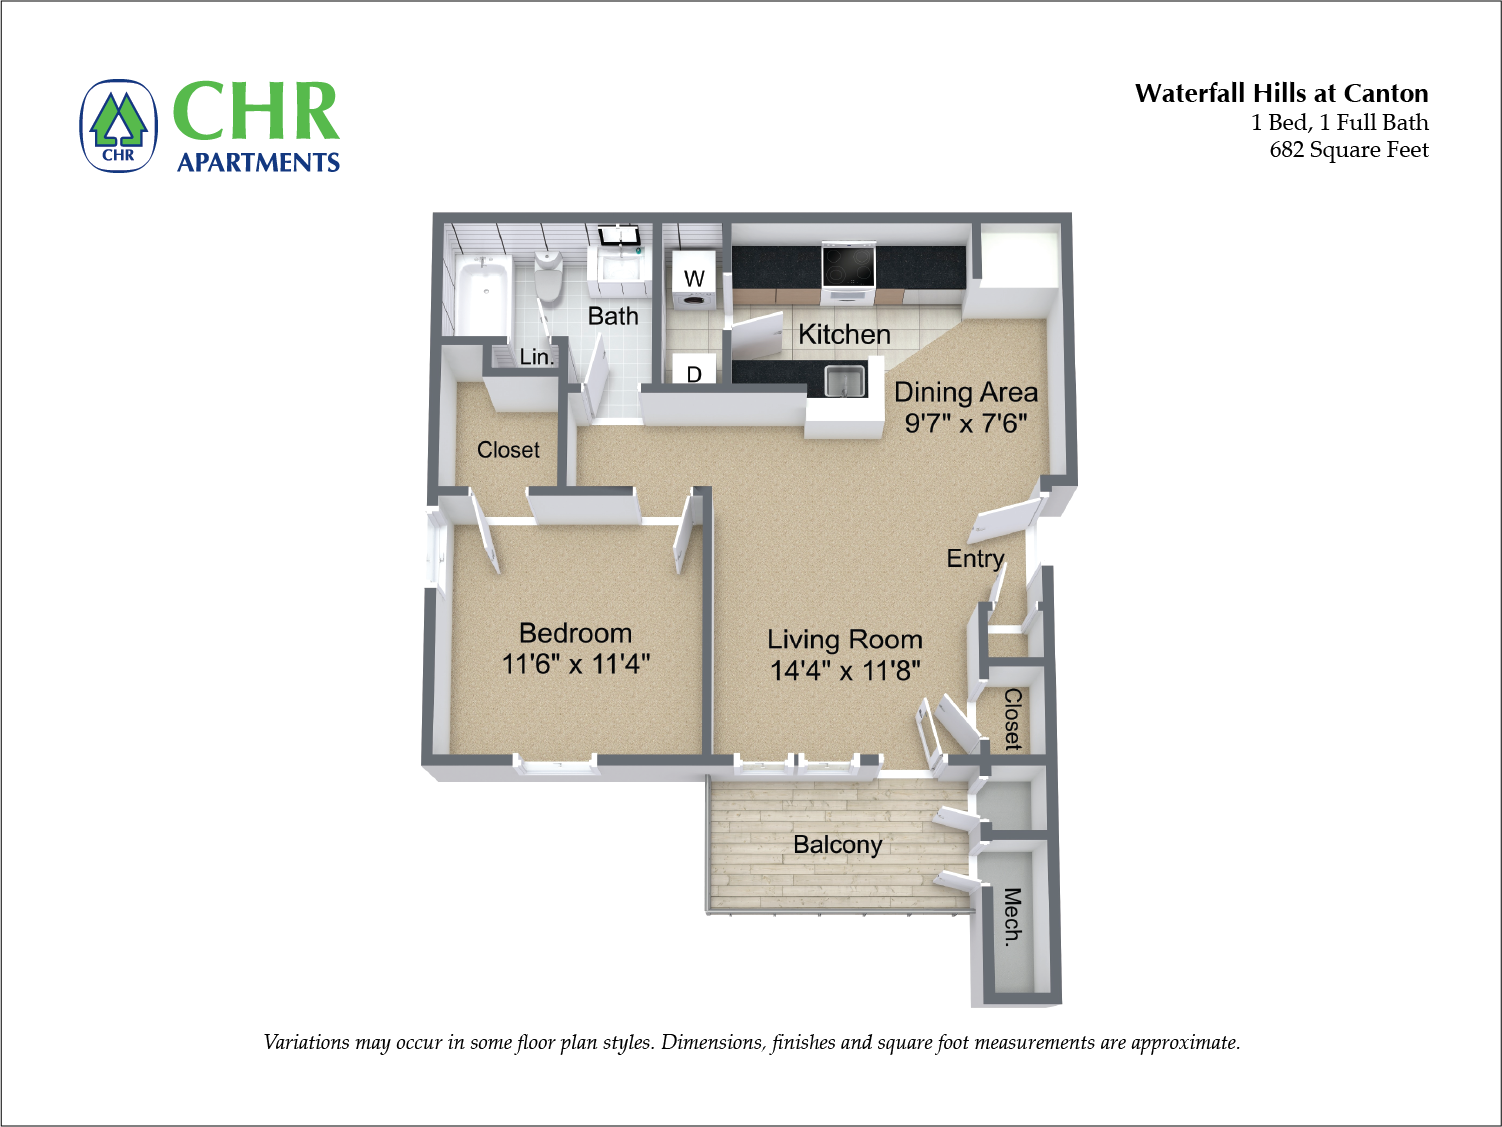 Click to view 1 Bed/1 Bath with Washer/Dryer floor plan gallery